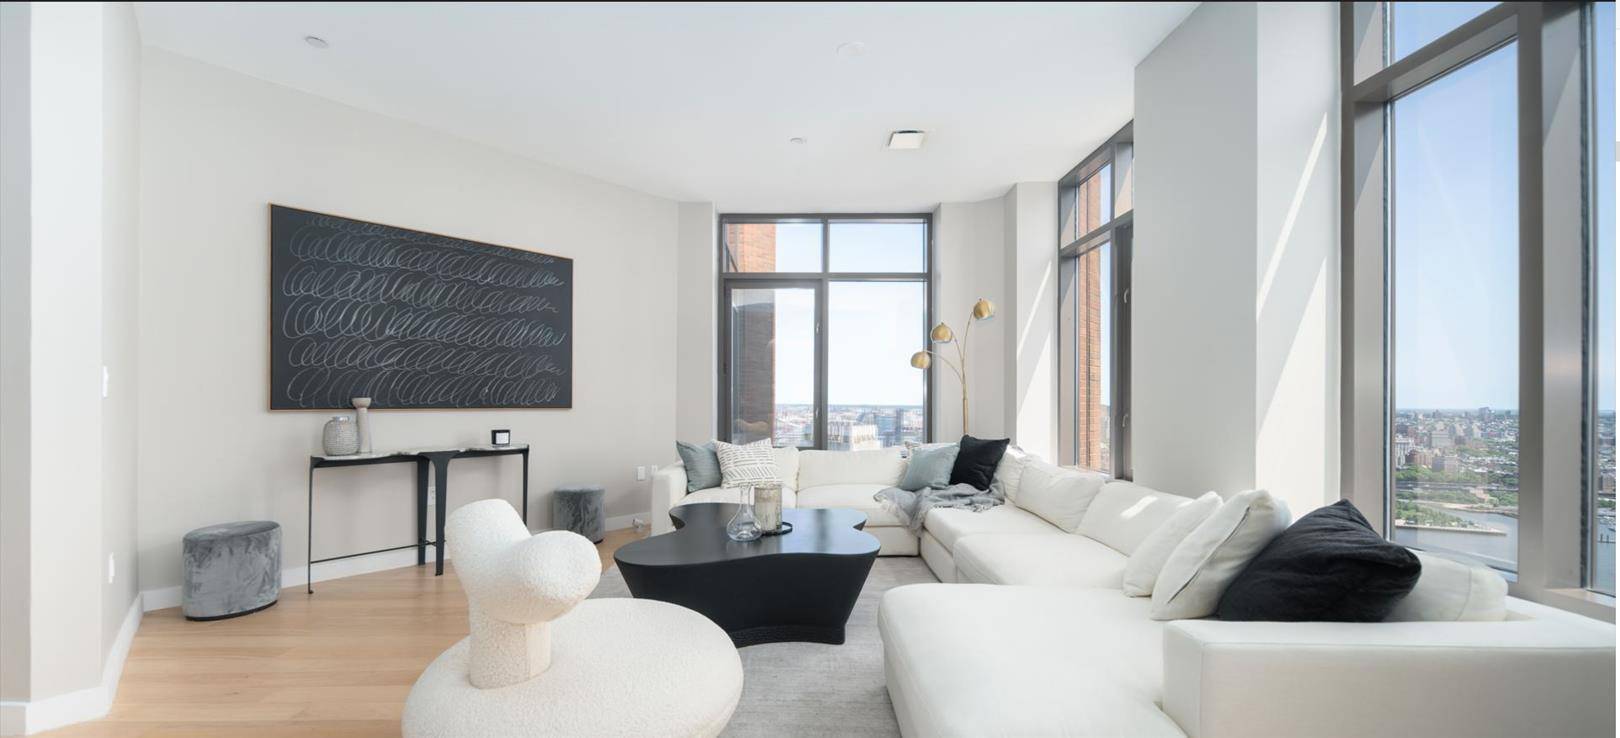 LIMITED TIME OFFER ! Starting immediately and offered until April 30th, 2024 the Platinum Properties team at 75 Wall Street is thrilled to announce an exclusive 4 commission for buyer ...